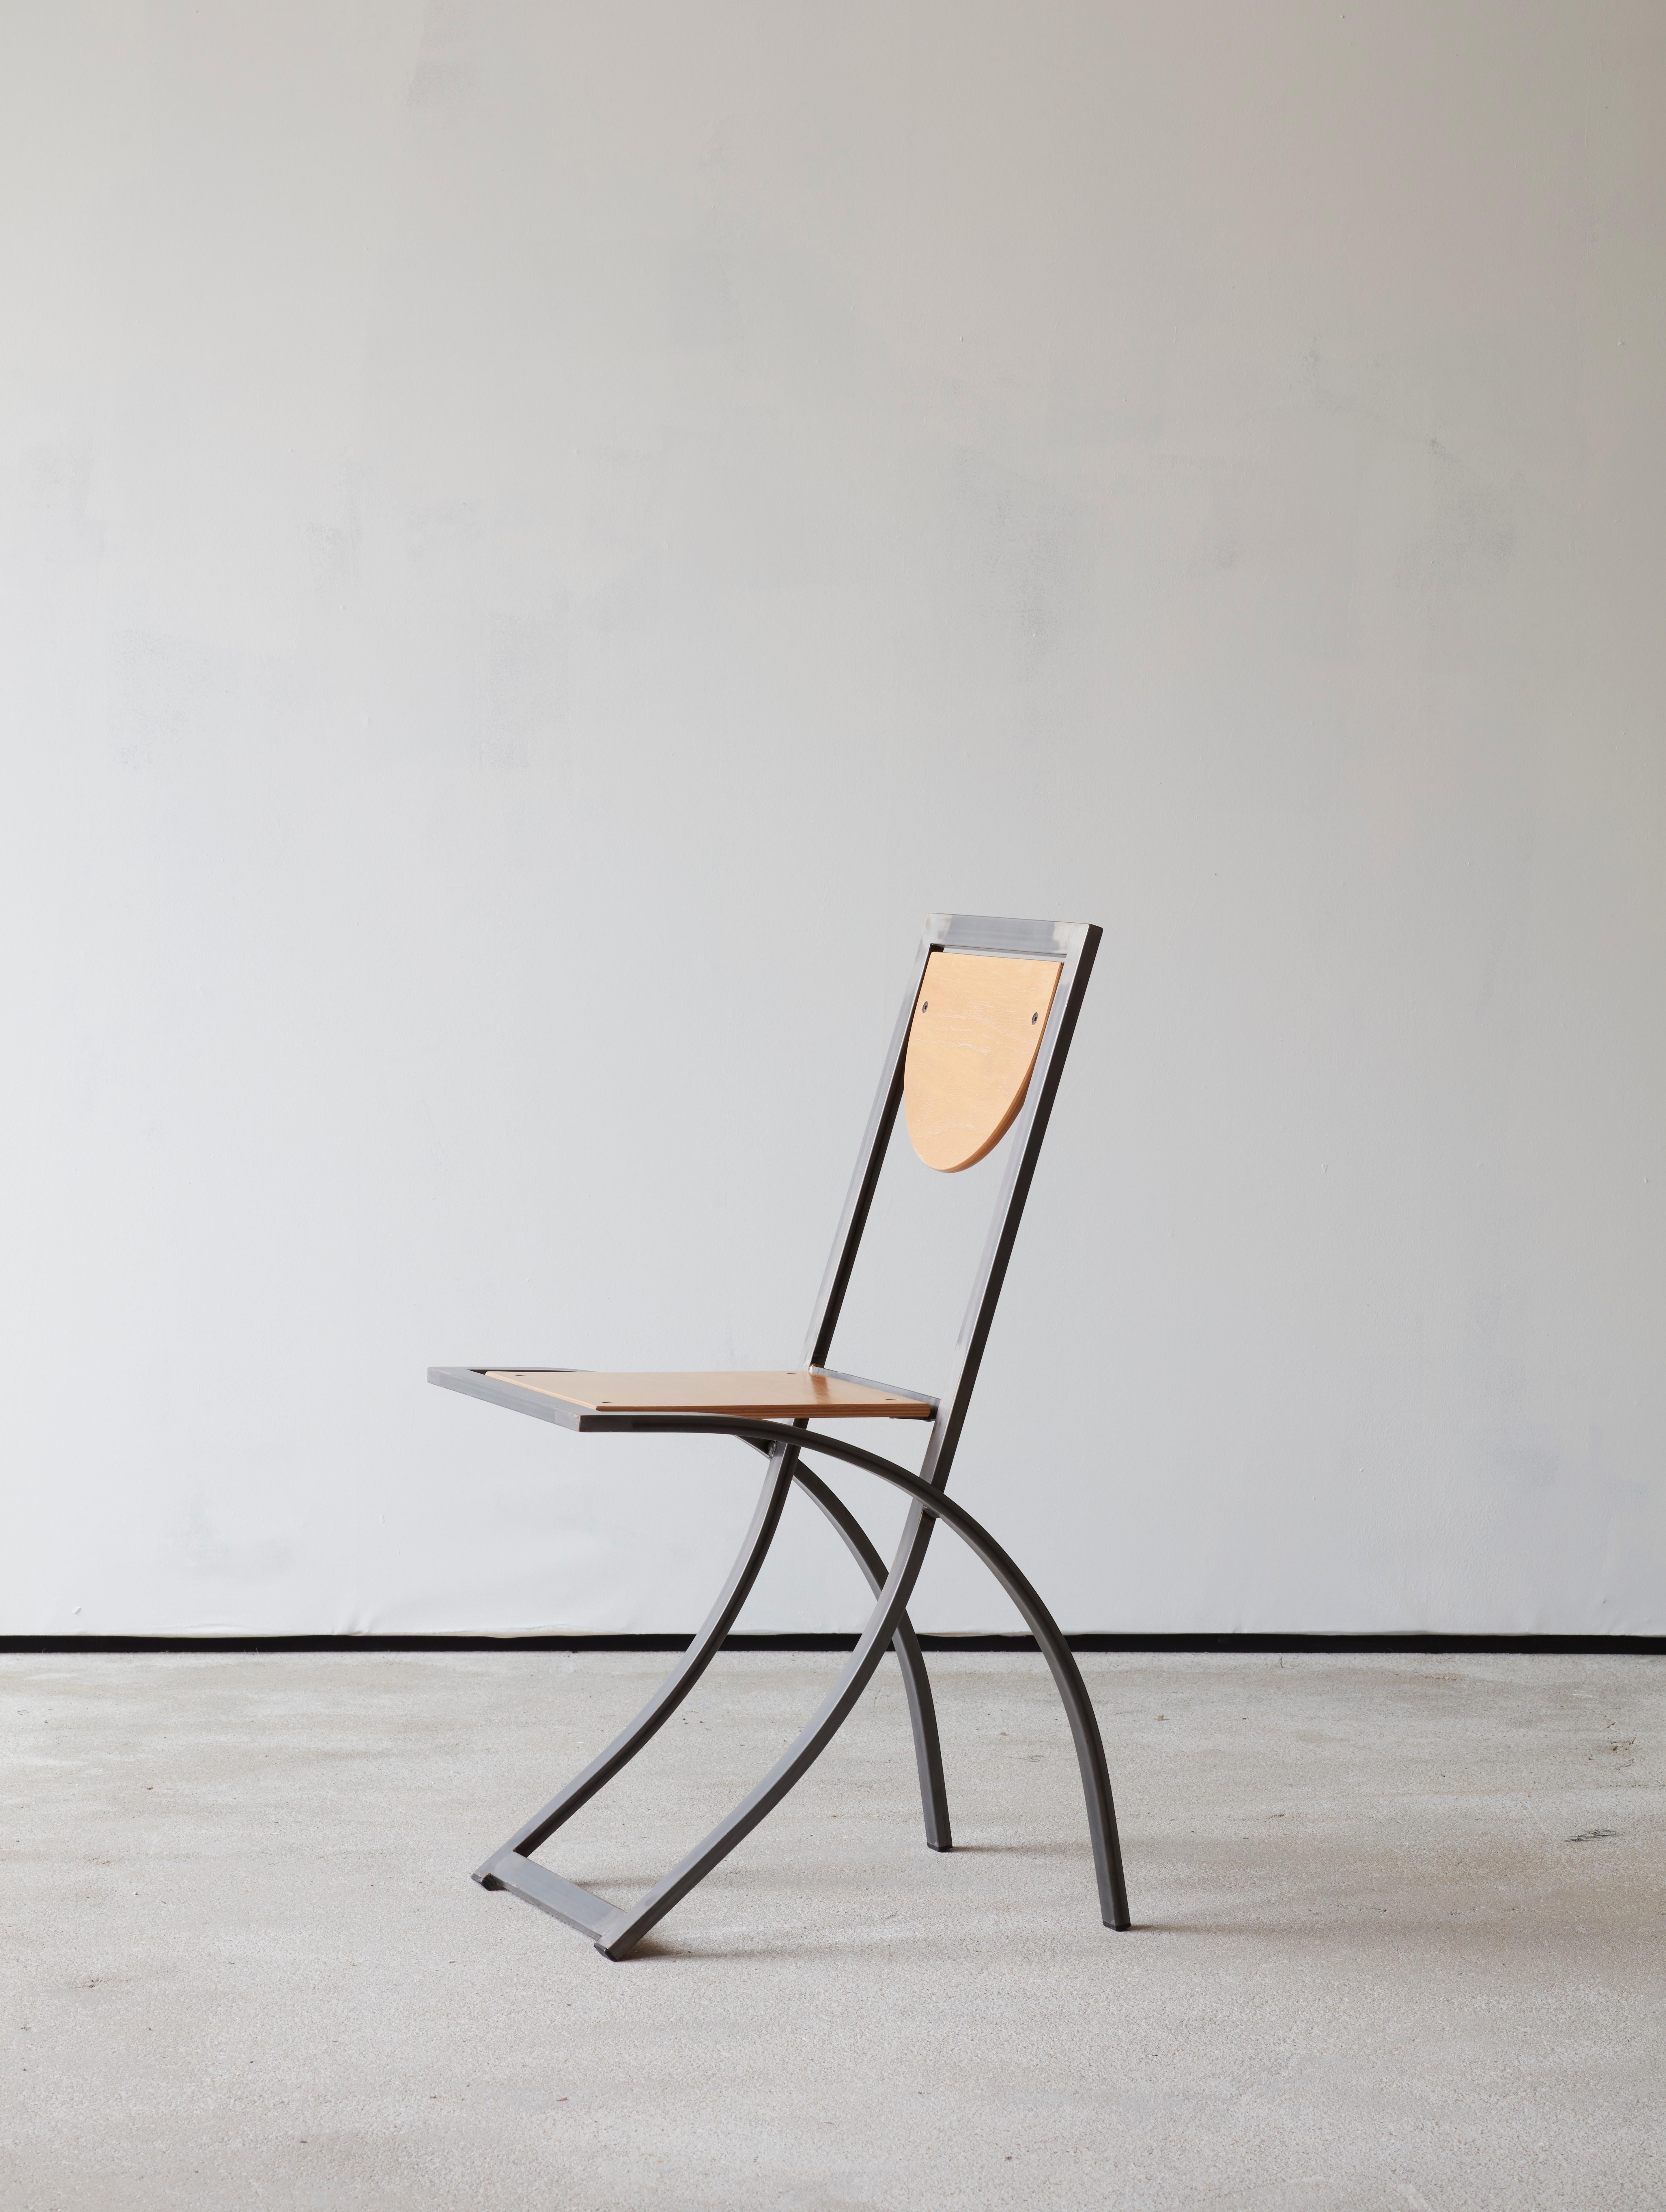 The Sinus chair is a classic of German design. 

Its flowing lines and minimal shapes, play with our notion of what a chair can be, creating a timeless piece.

The chair is formed from a forged steel frame which follows sinuous lines combined with